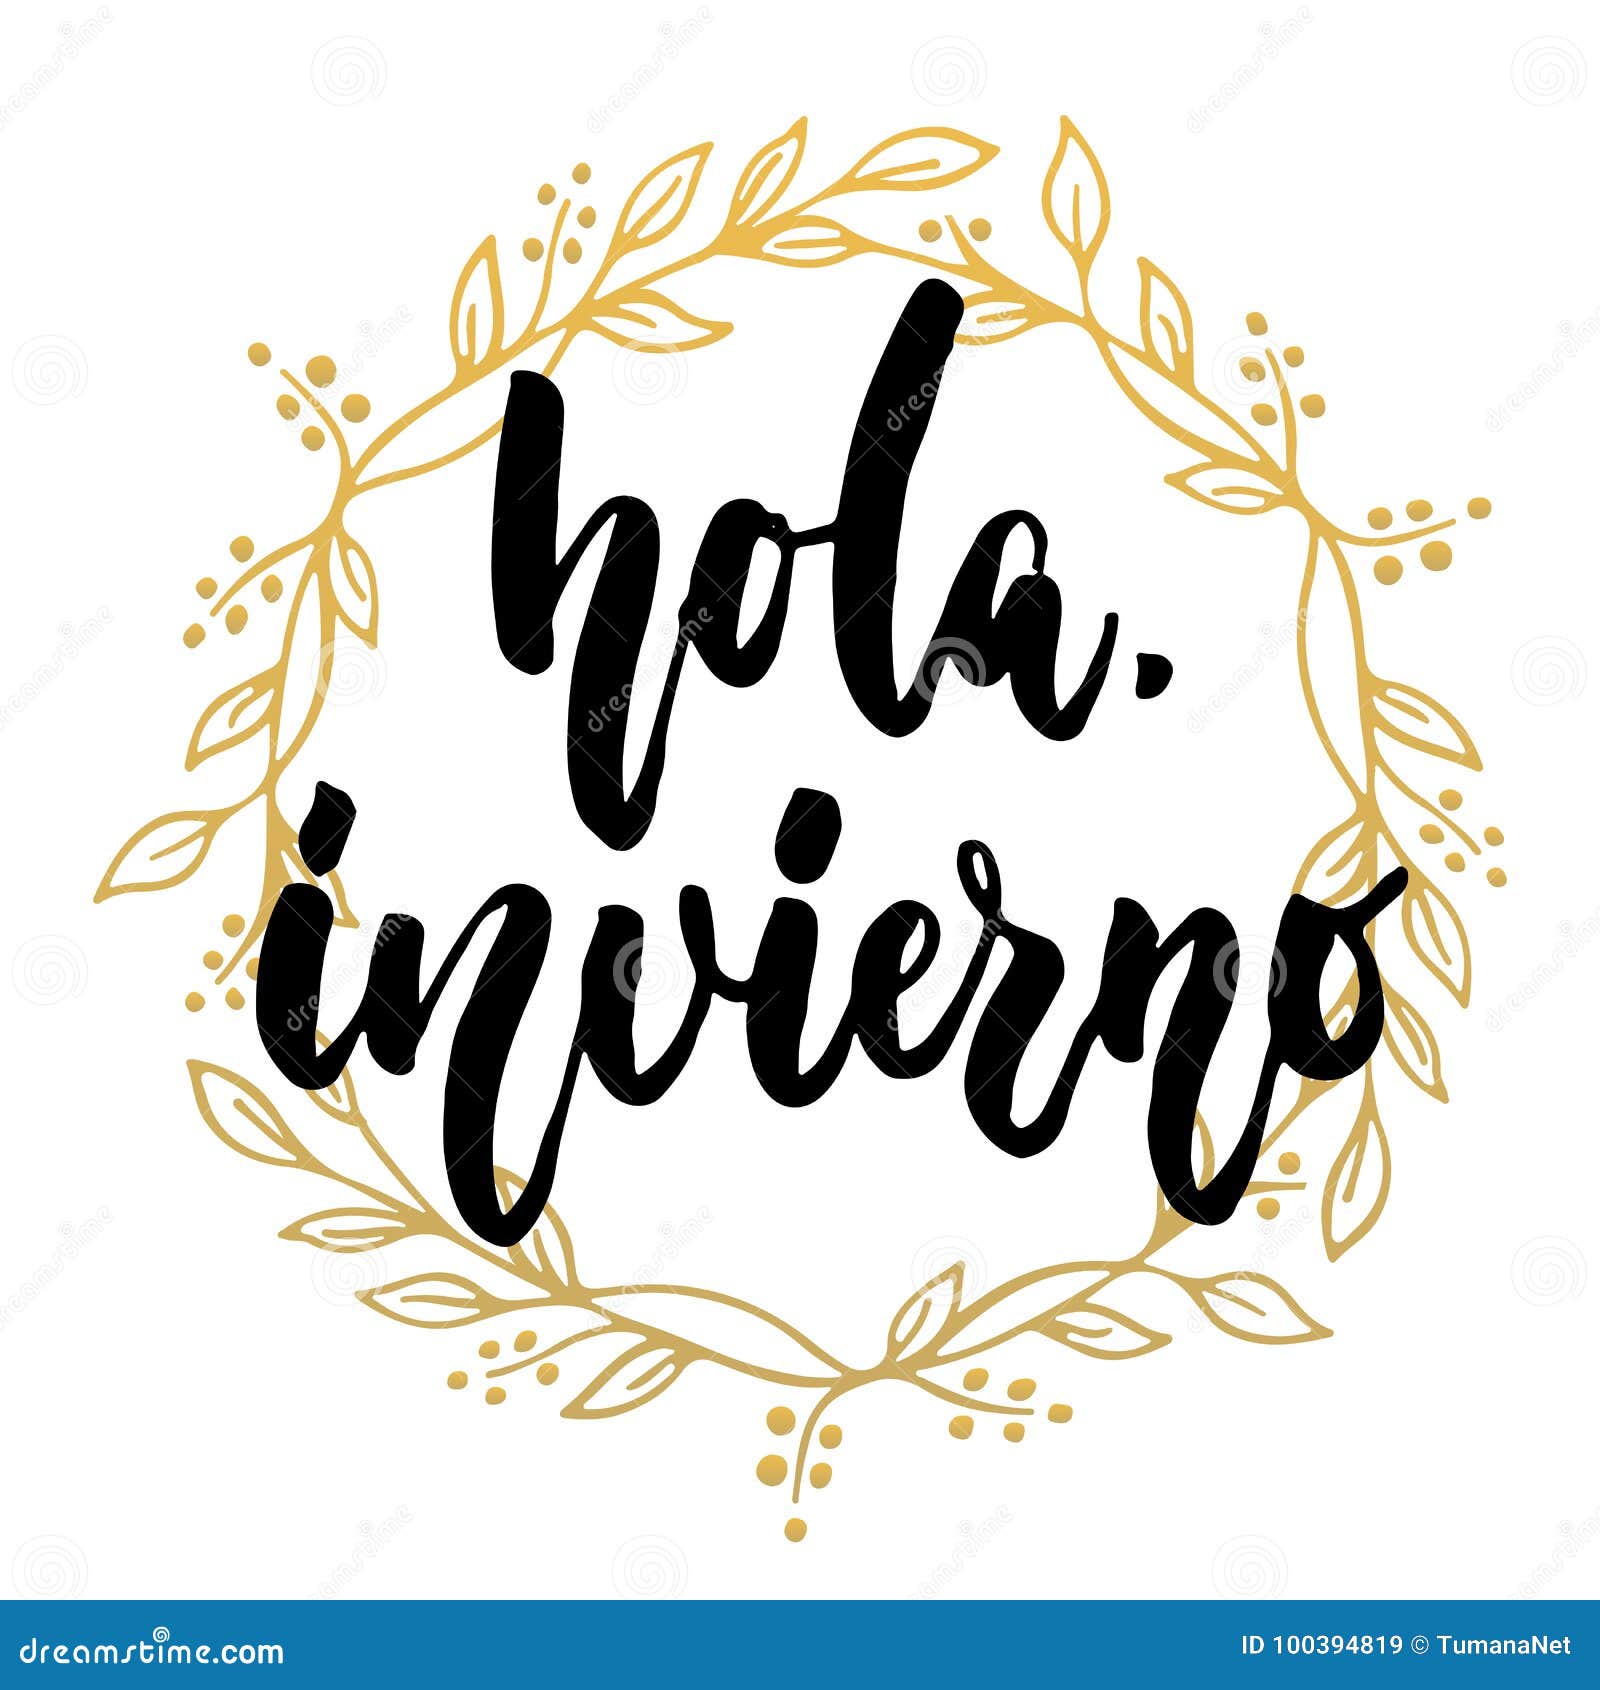 hola, invierno - hello, winter in spanish, hand drawn lettering latin quote with golden wreath  on the white background. f